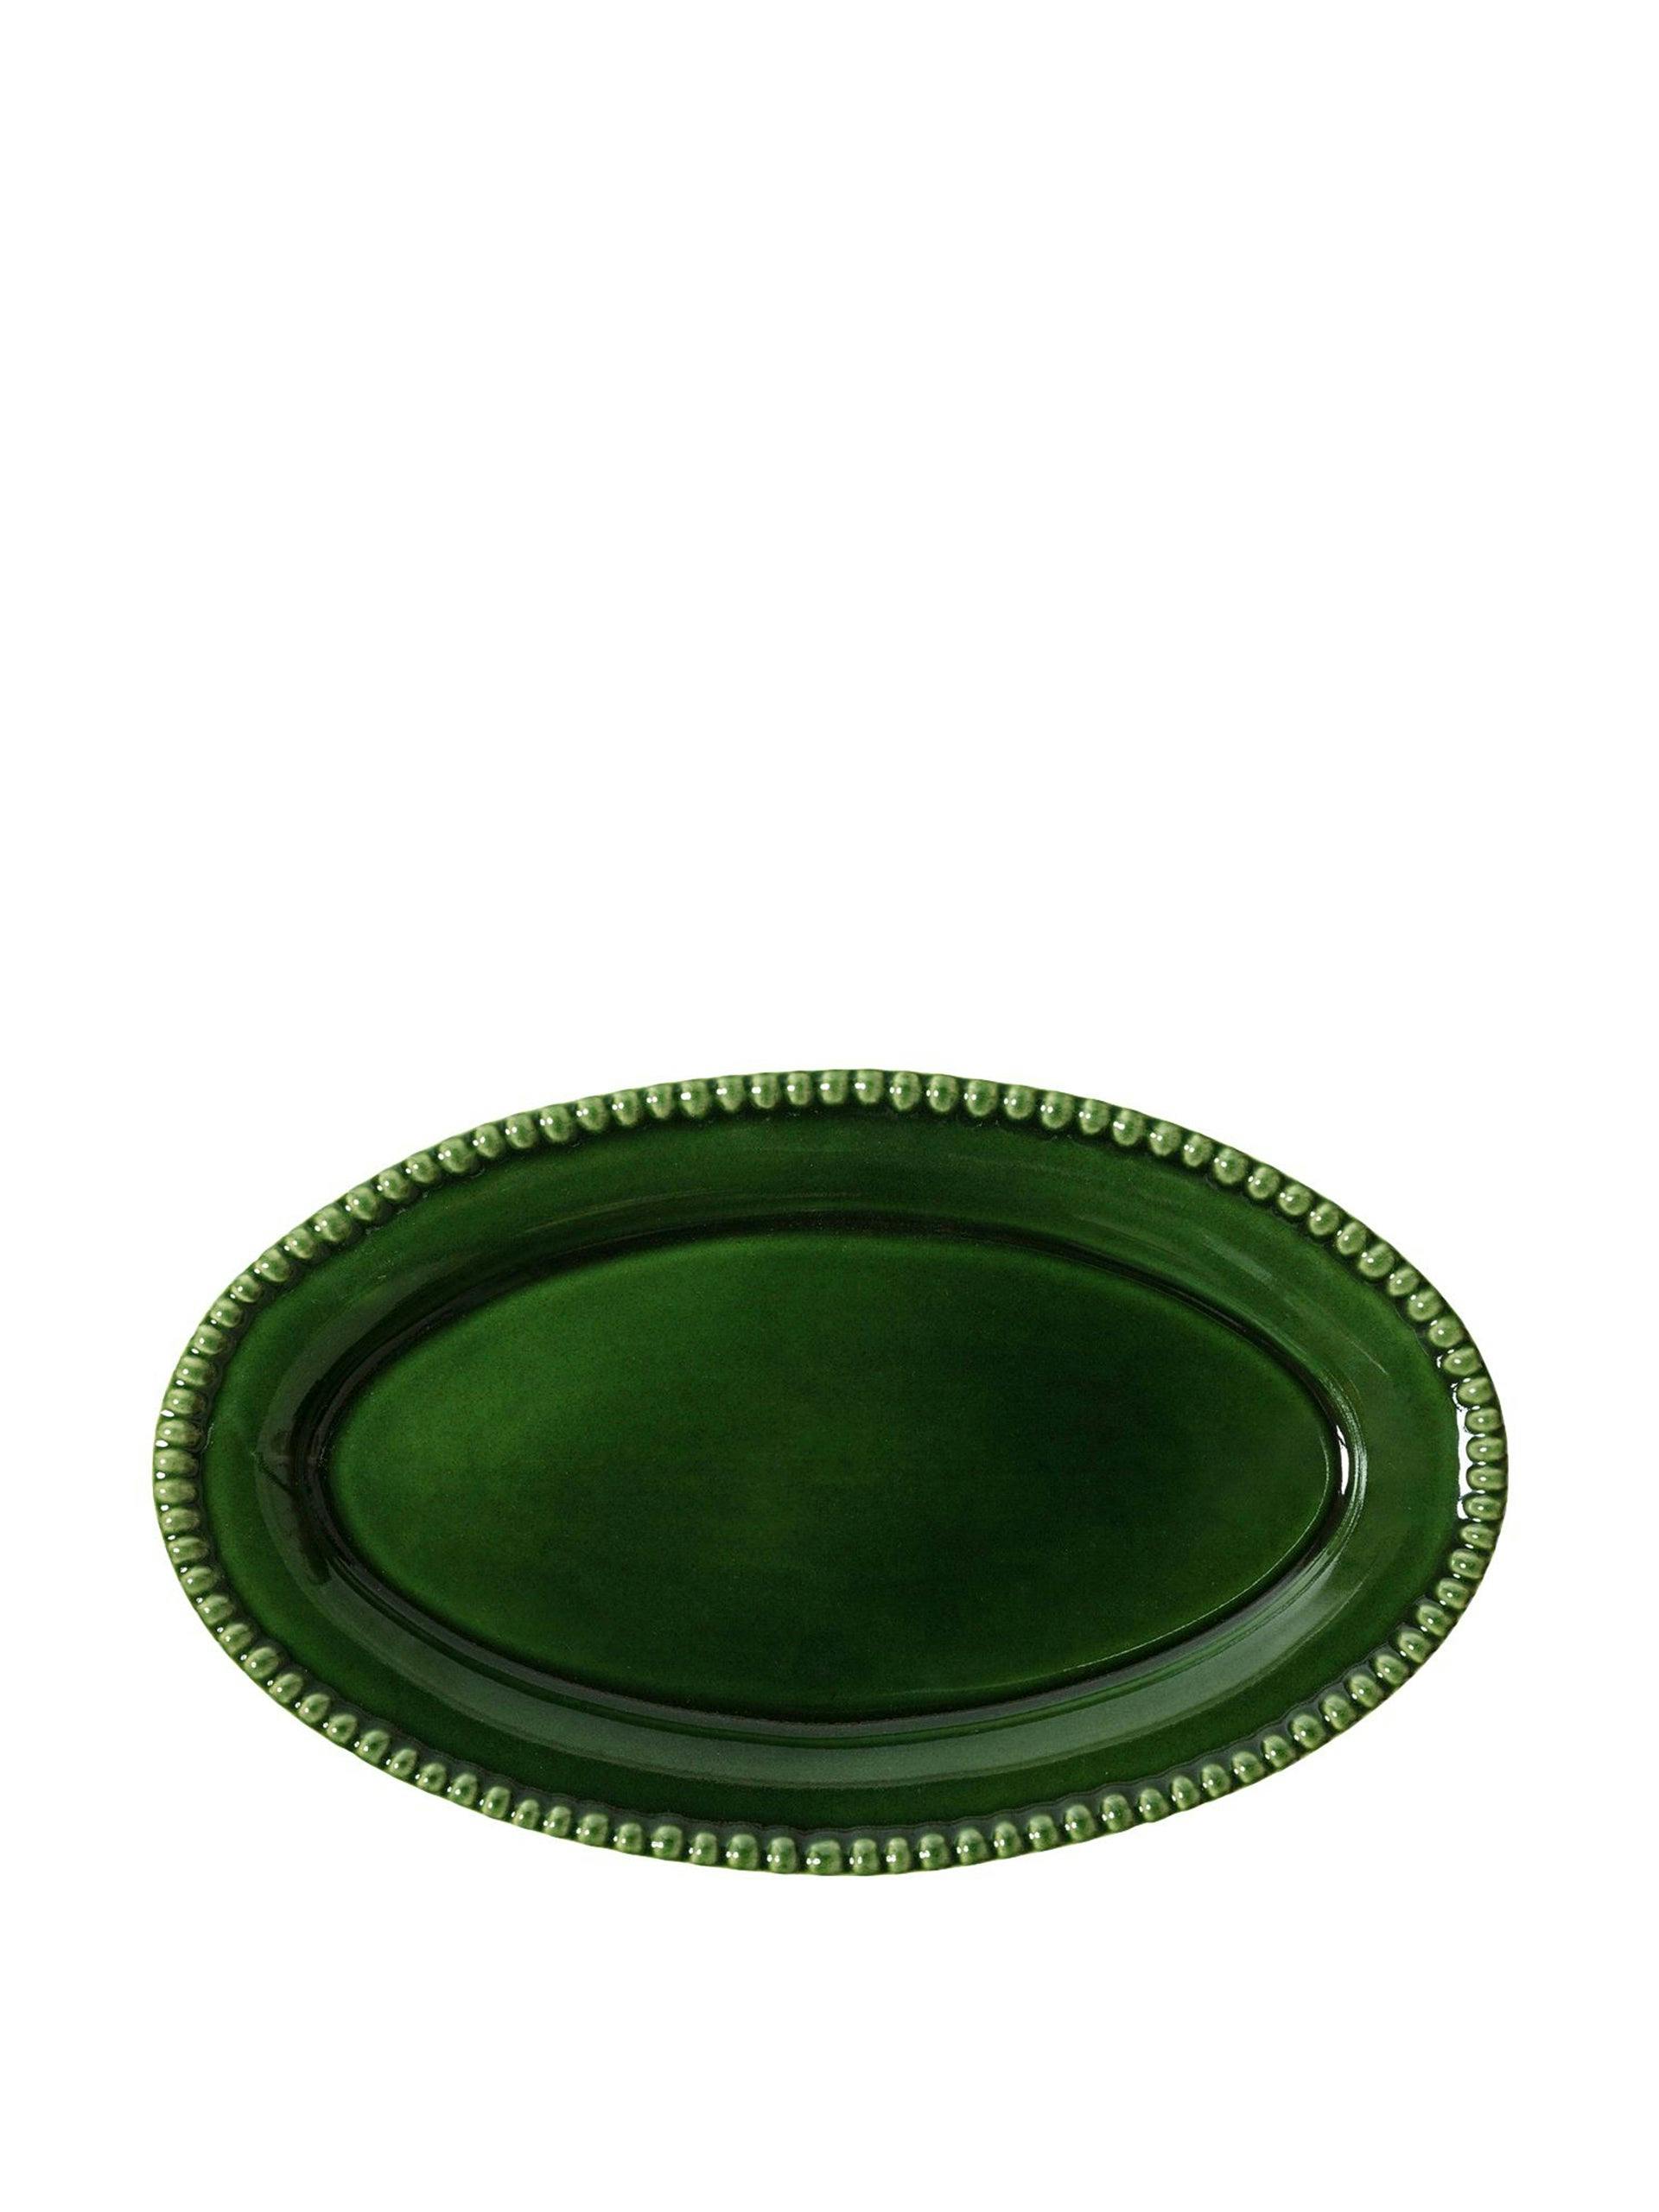 Green stoneware serving plate